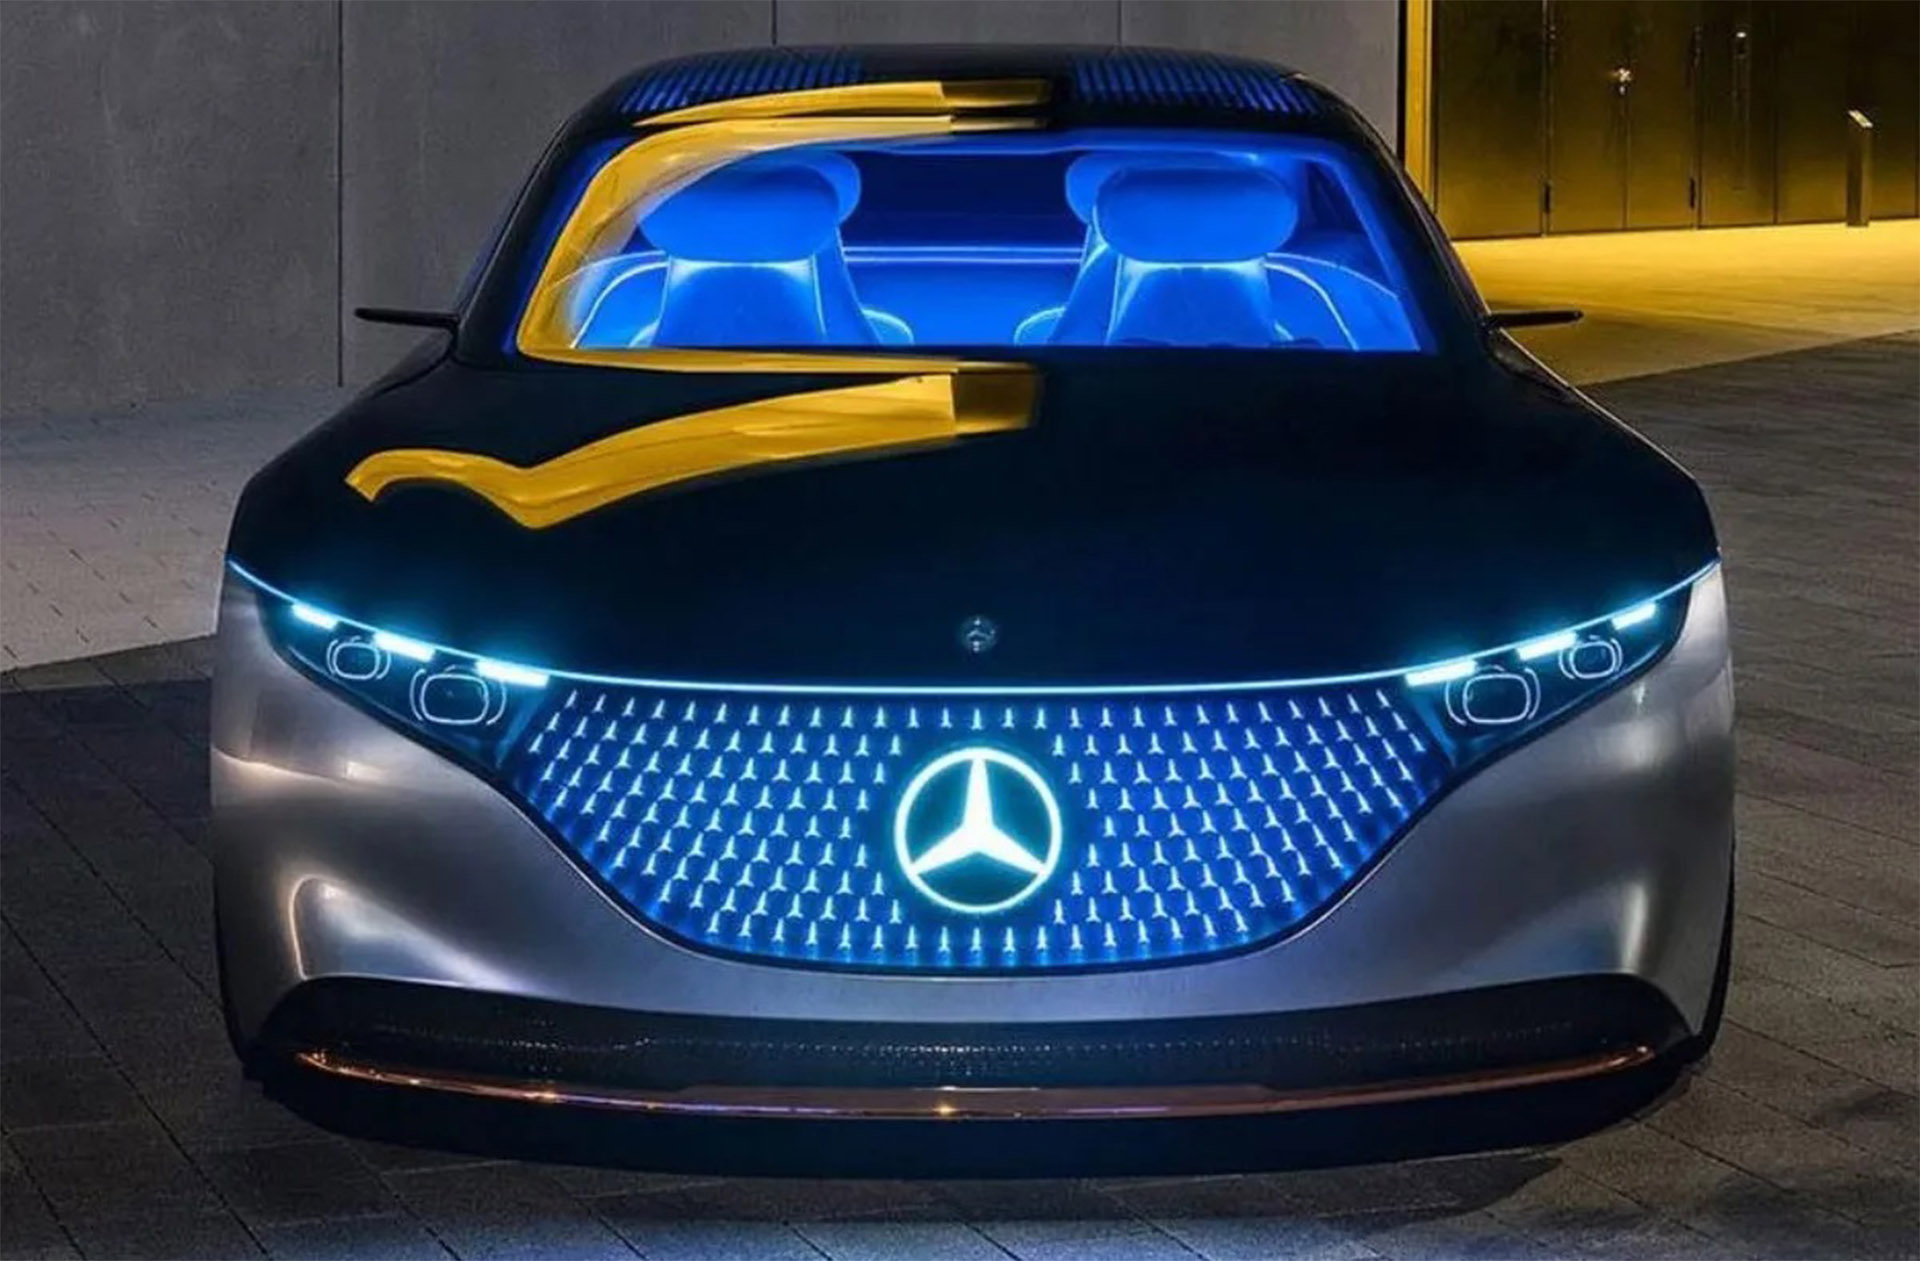 Mercedes bet everything on electric cars and announced that by 2030 it will only sell this technology in Europe